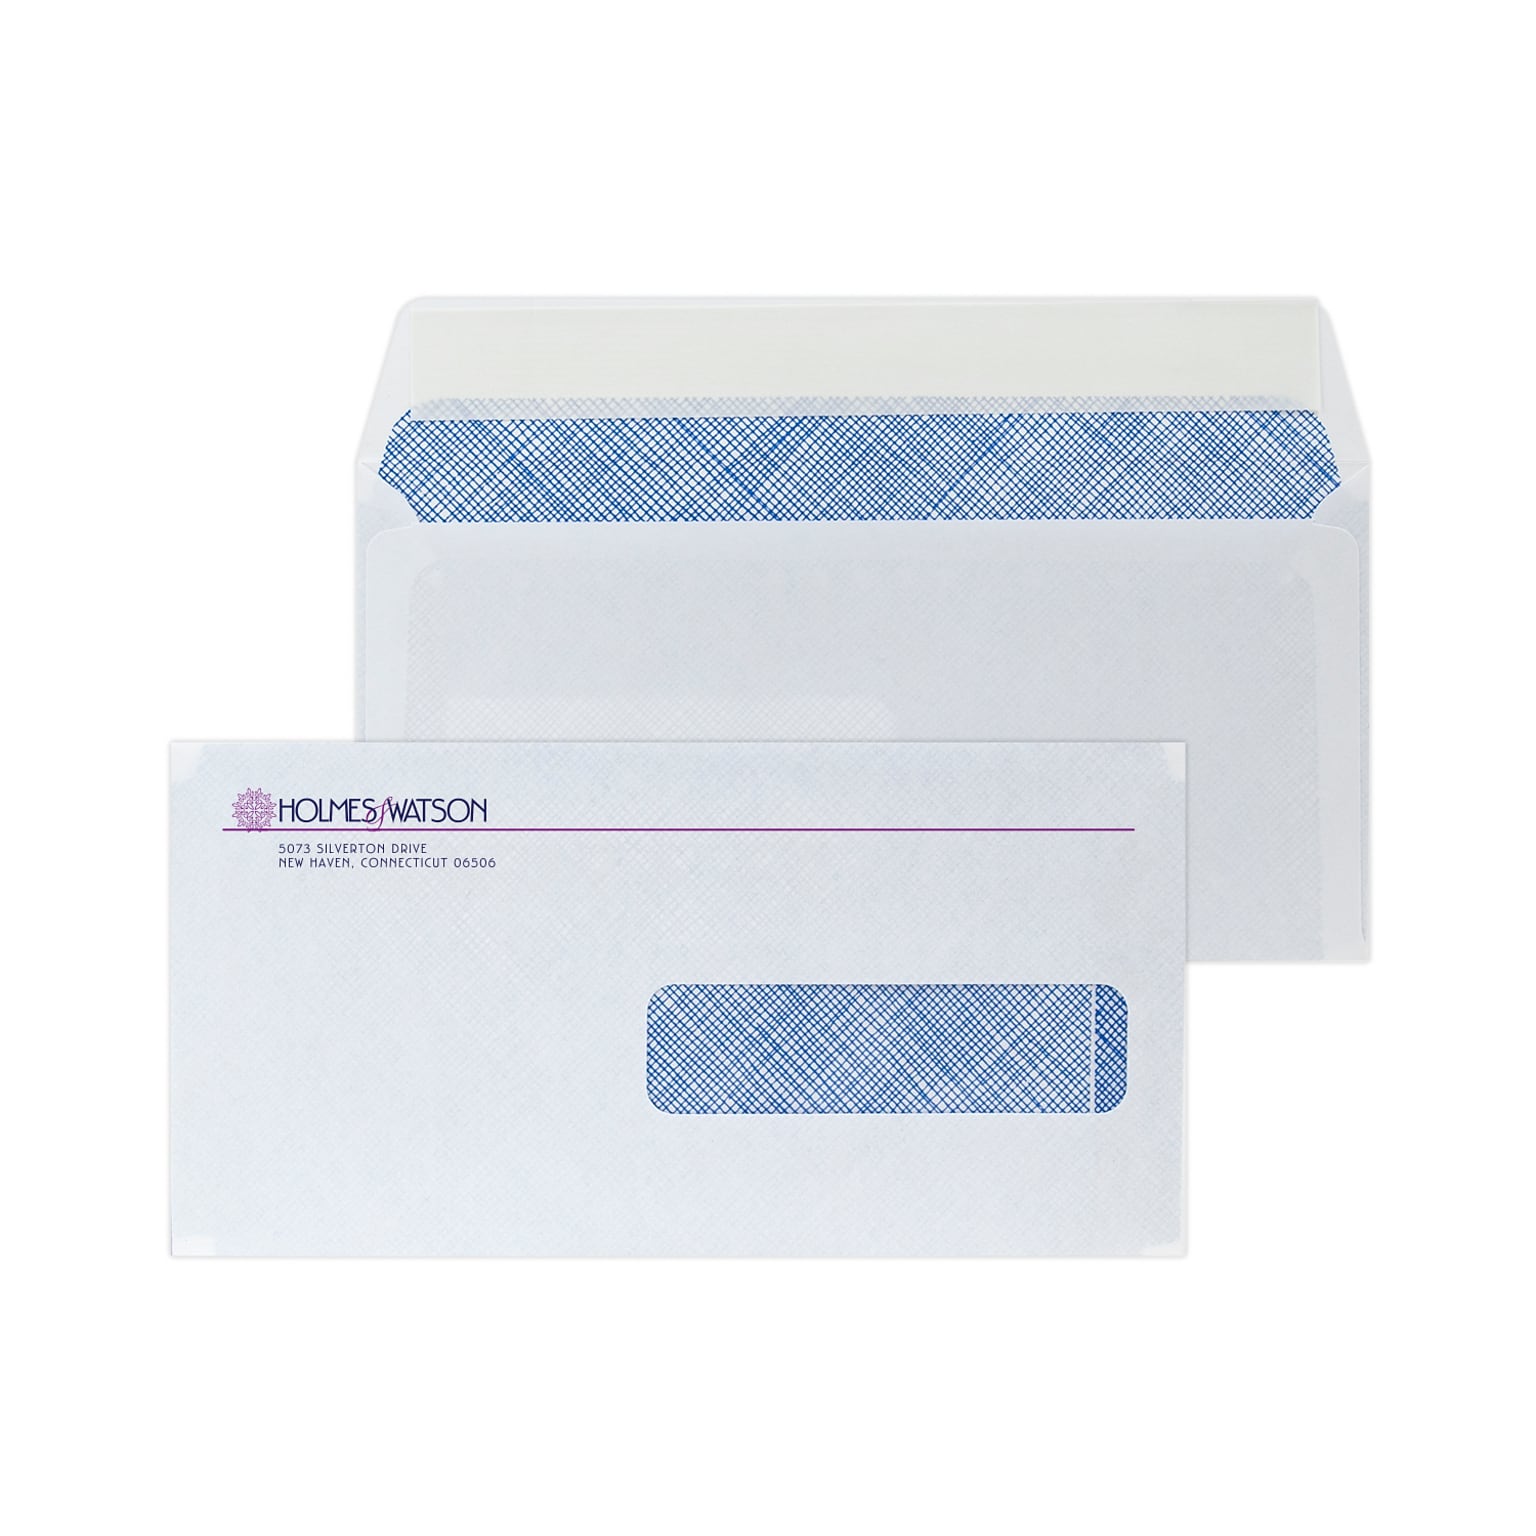 Custom 4-1/2x9 Insurance Claim Peel and Seal Right Window Envelope with Security Tint, 24# White Wove, 2 Custom Ink, 250/Pack